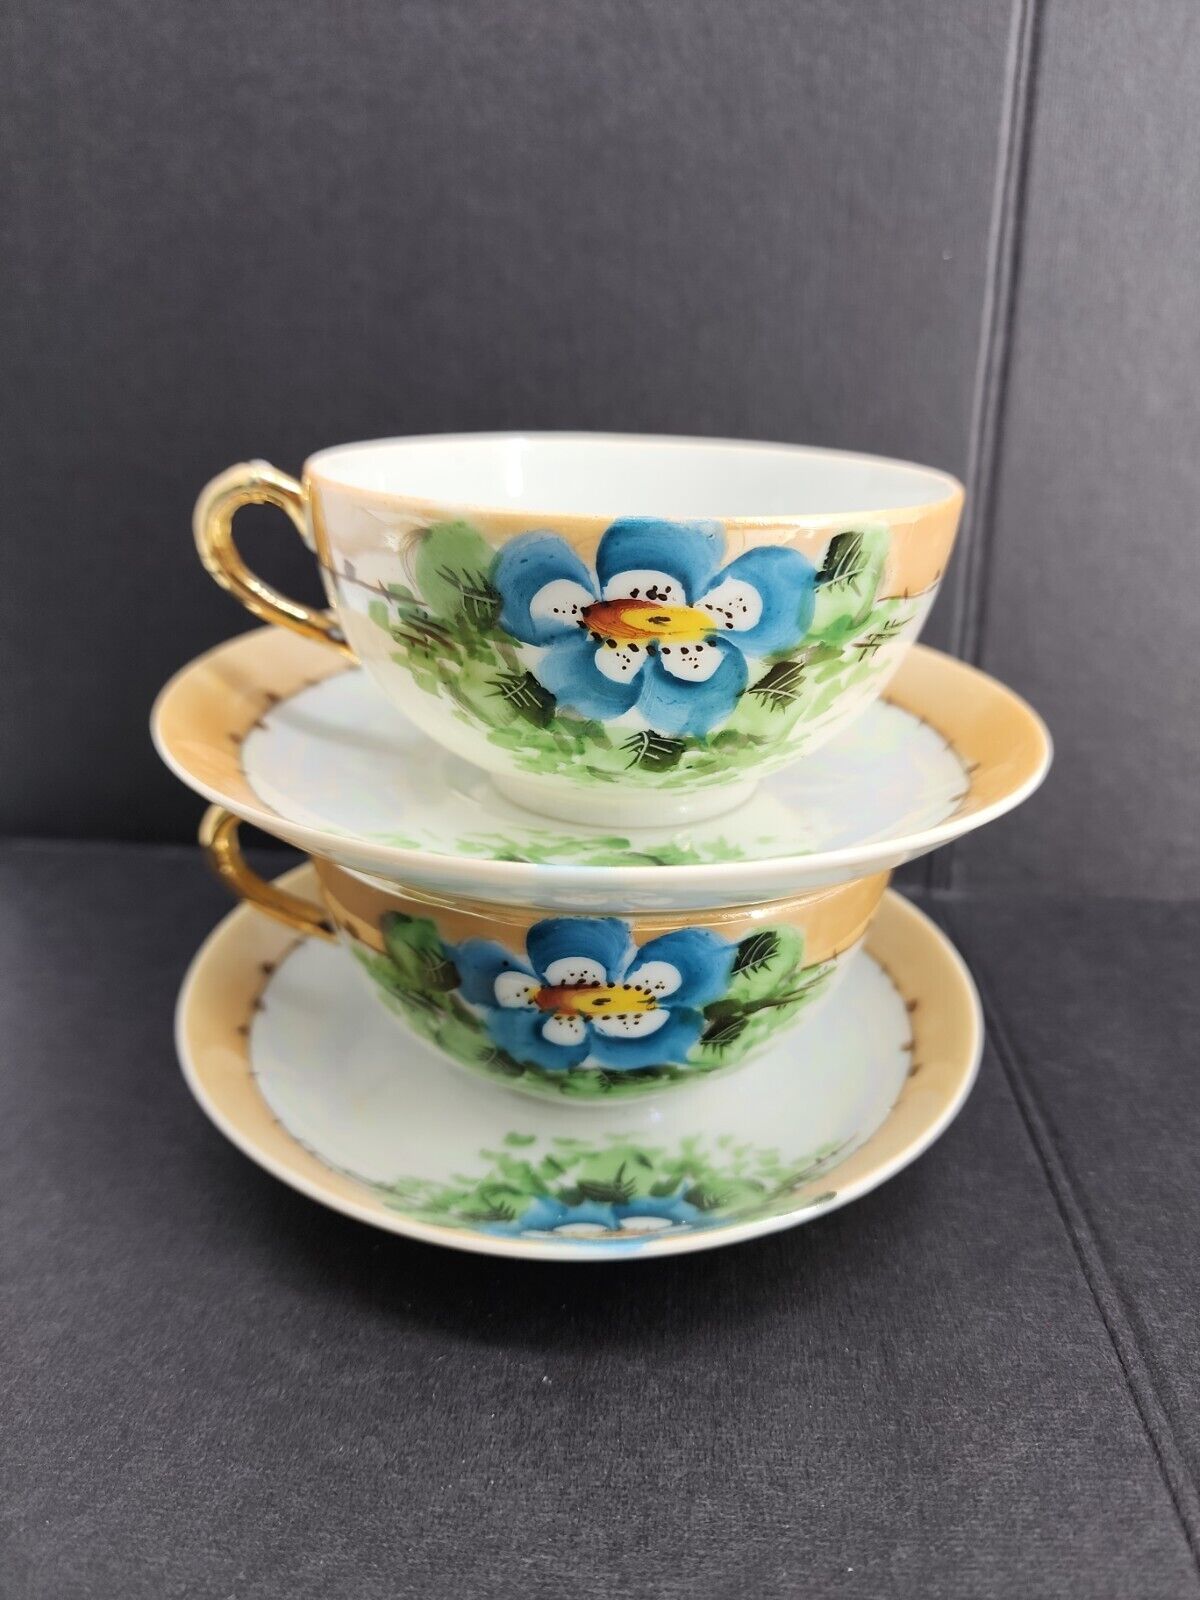 Vintage Lusterware Tea Cups And Saucers Blue Floral Set Collectible Glassware